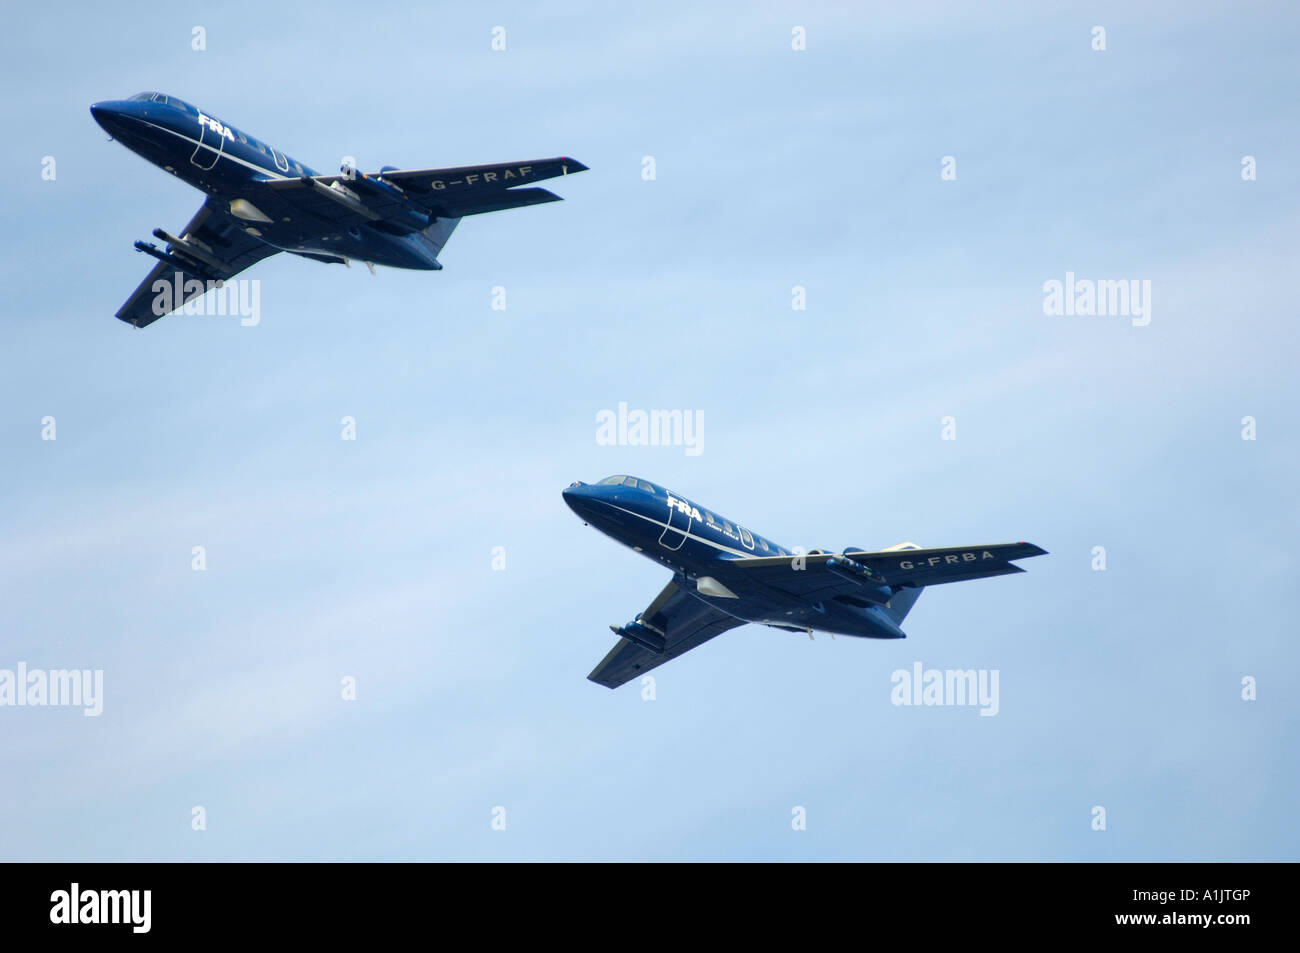 Two Dassault Falcon 20  aircraft owned by FR Aviation flying in formation at the Farnborough International Airshow 2006 Stock Photo